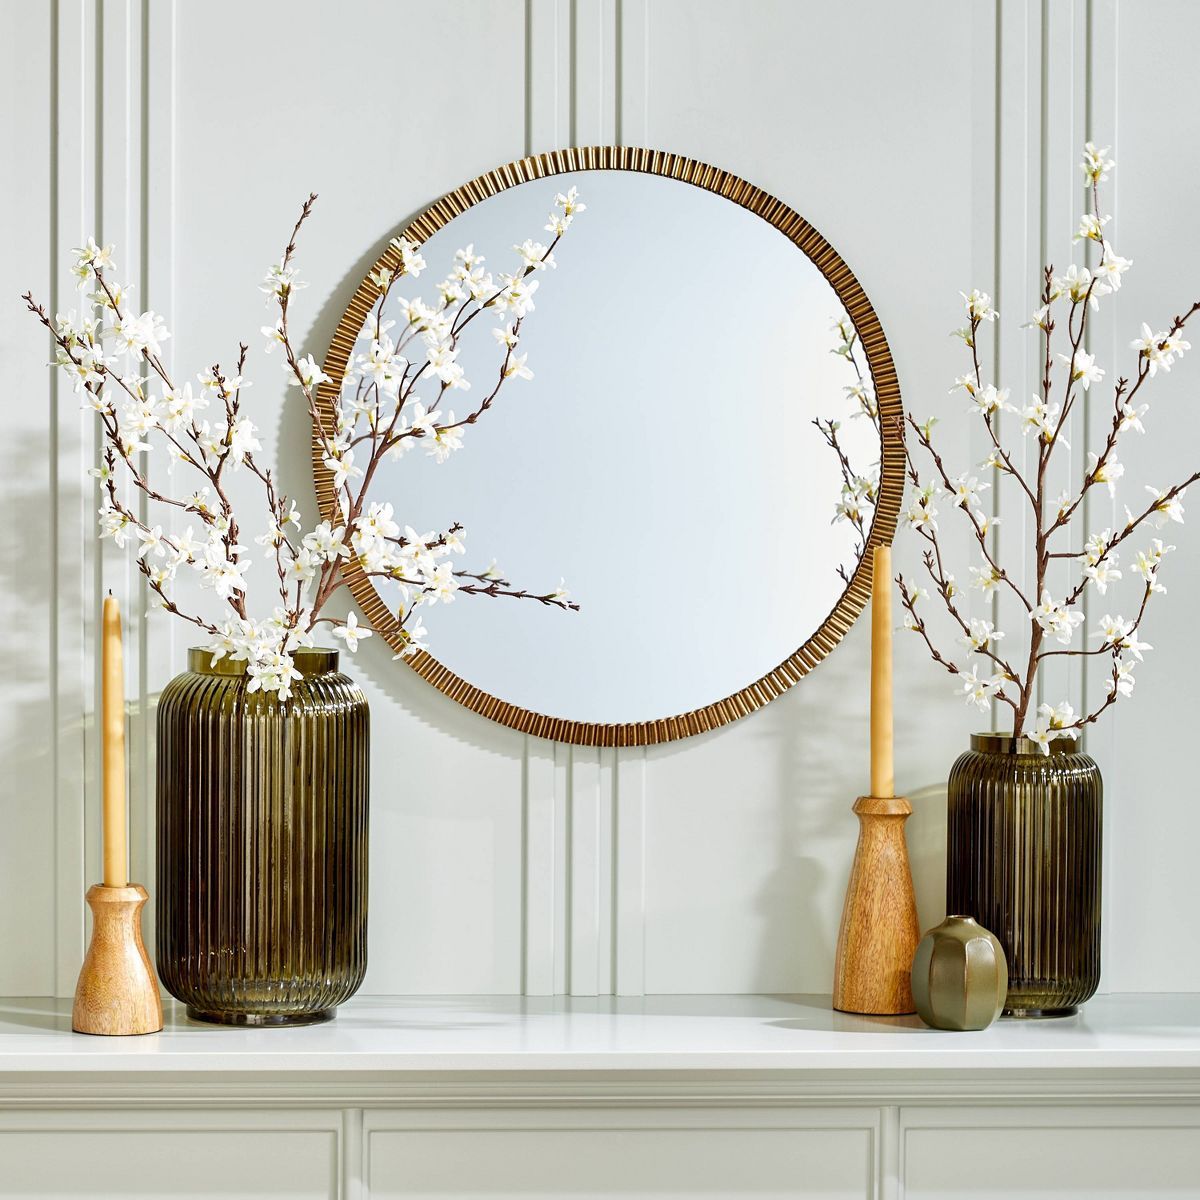 Pleated Brass Round Wall Mirror Antique Finish - Hearth & Hand™ with Magnolia | Target